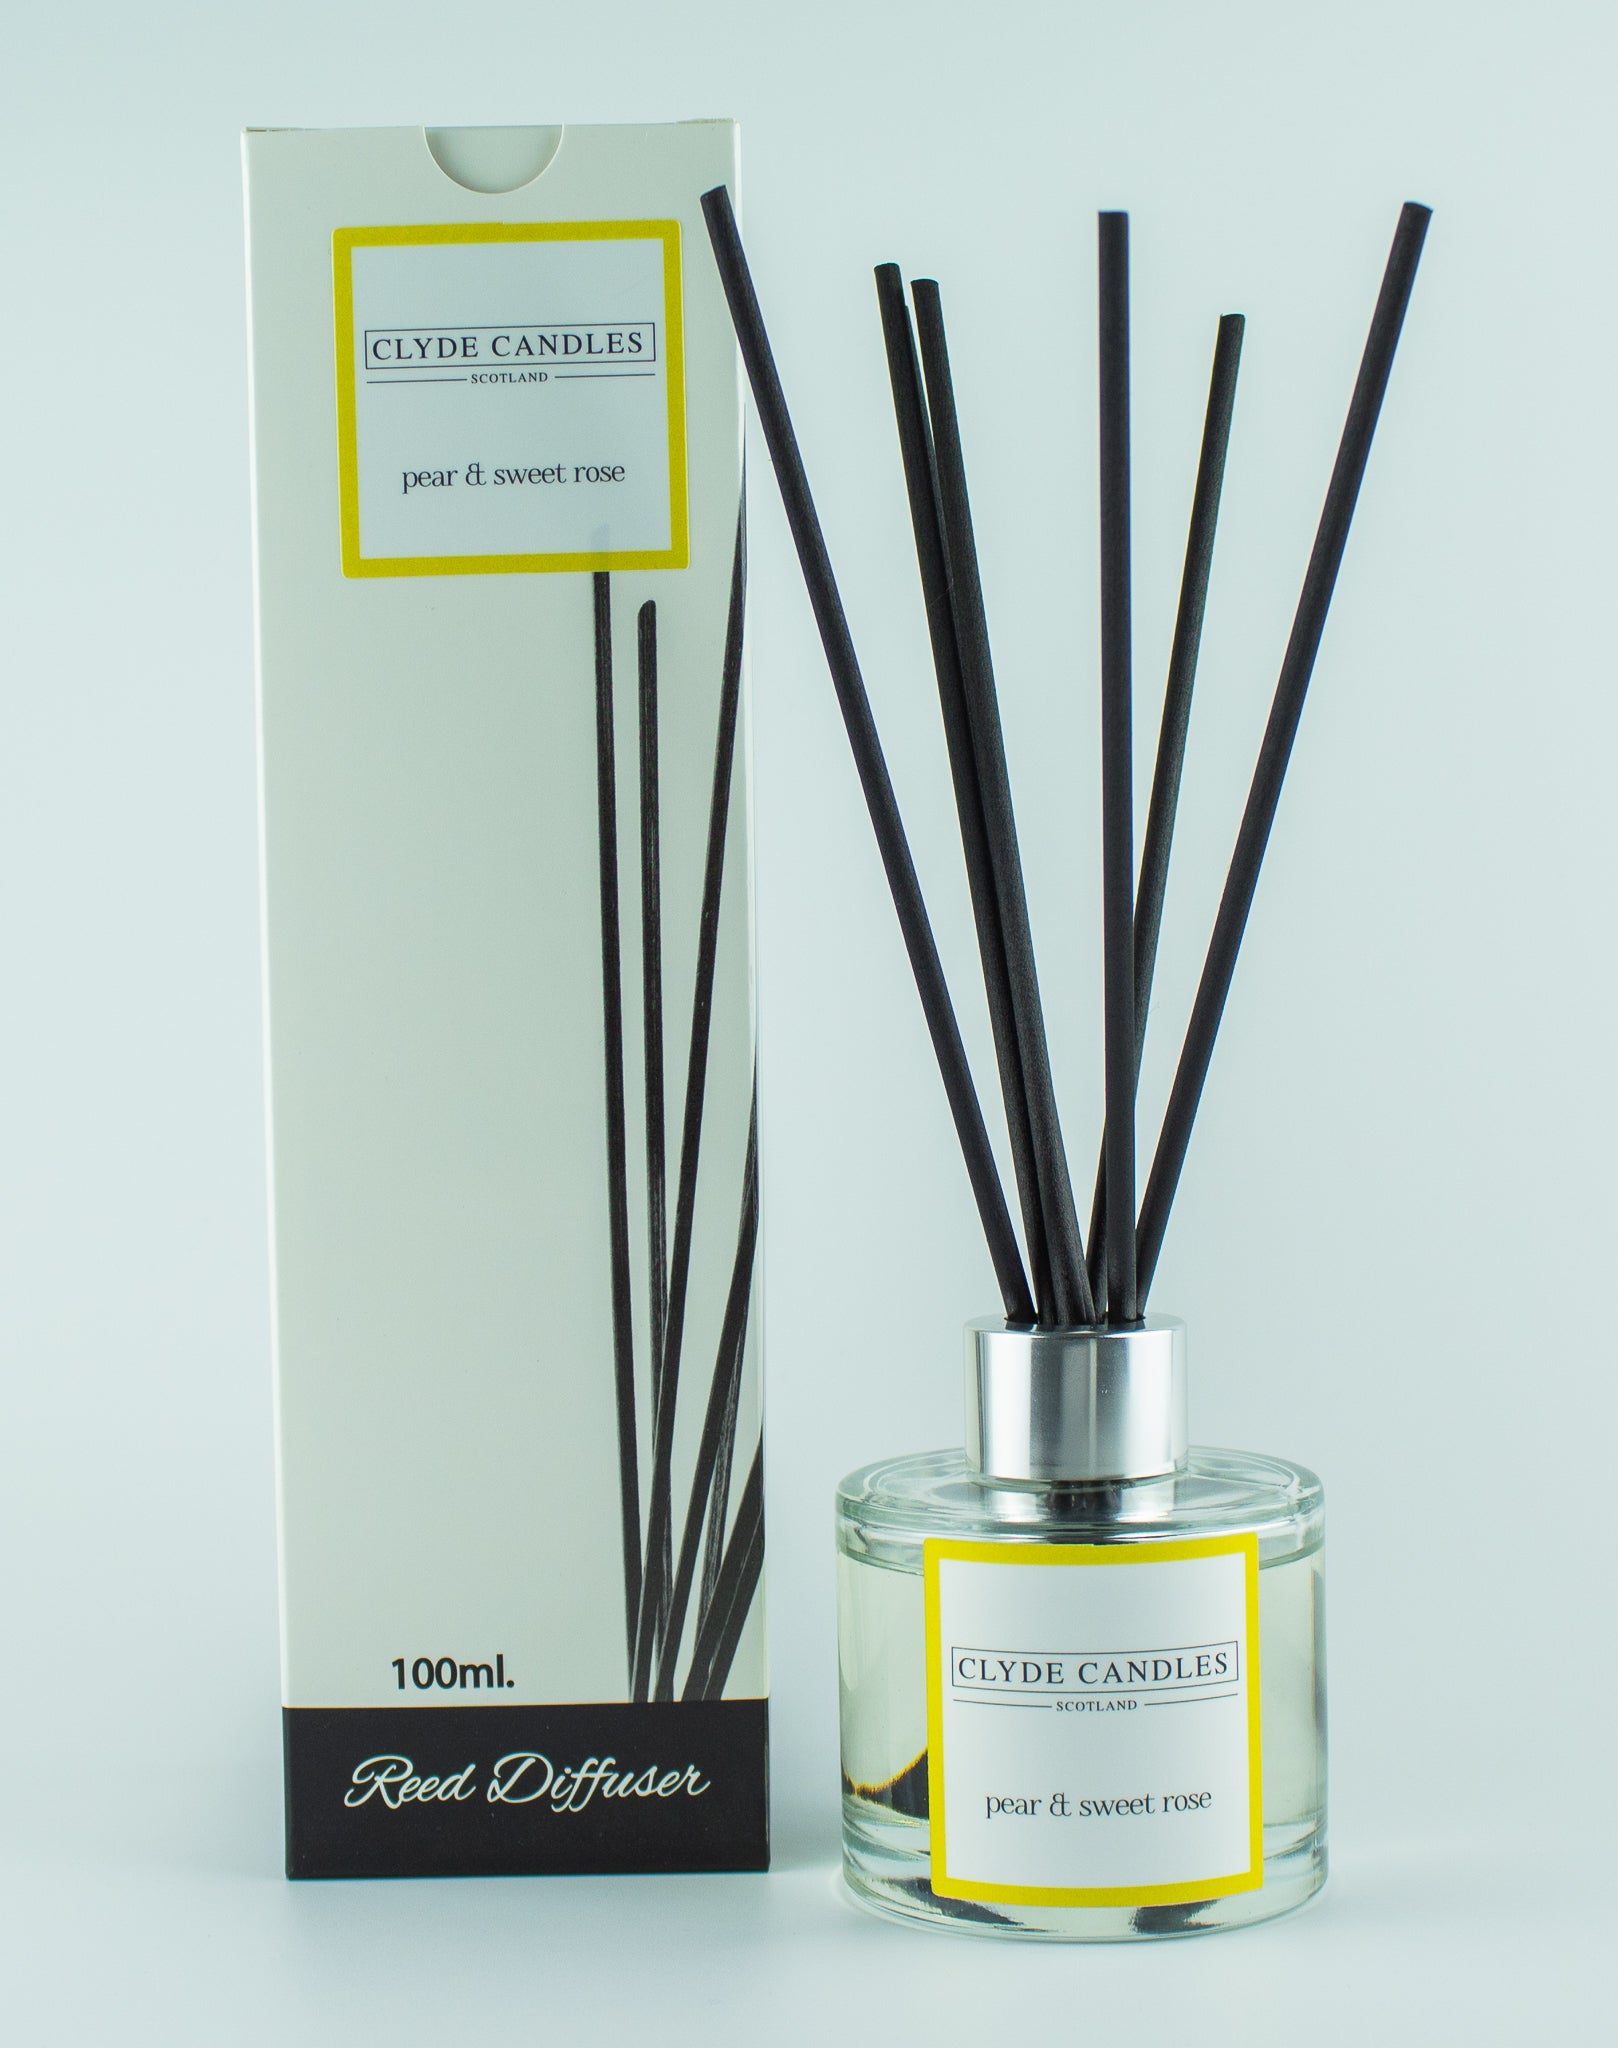 Pear And Sweet Rose Reed Diffuser - Clyde Candles, Luxury Diffuser Oil with a Set of 7 Fibre Sticks, 100ml, Best Aroma Scent for Home, Kitchen, Living Room, Bathroom. Fragrance Diffusers set with sticks